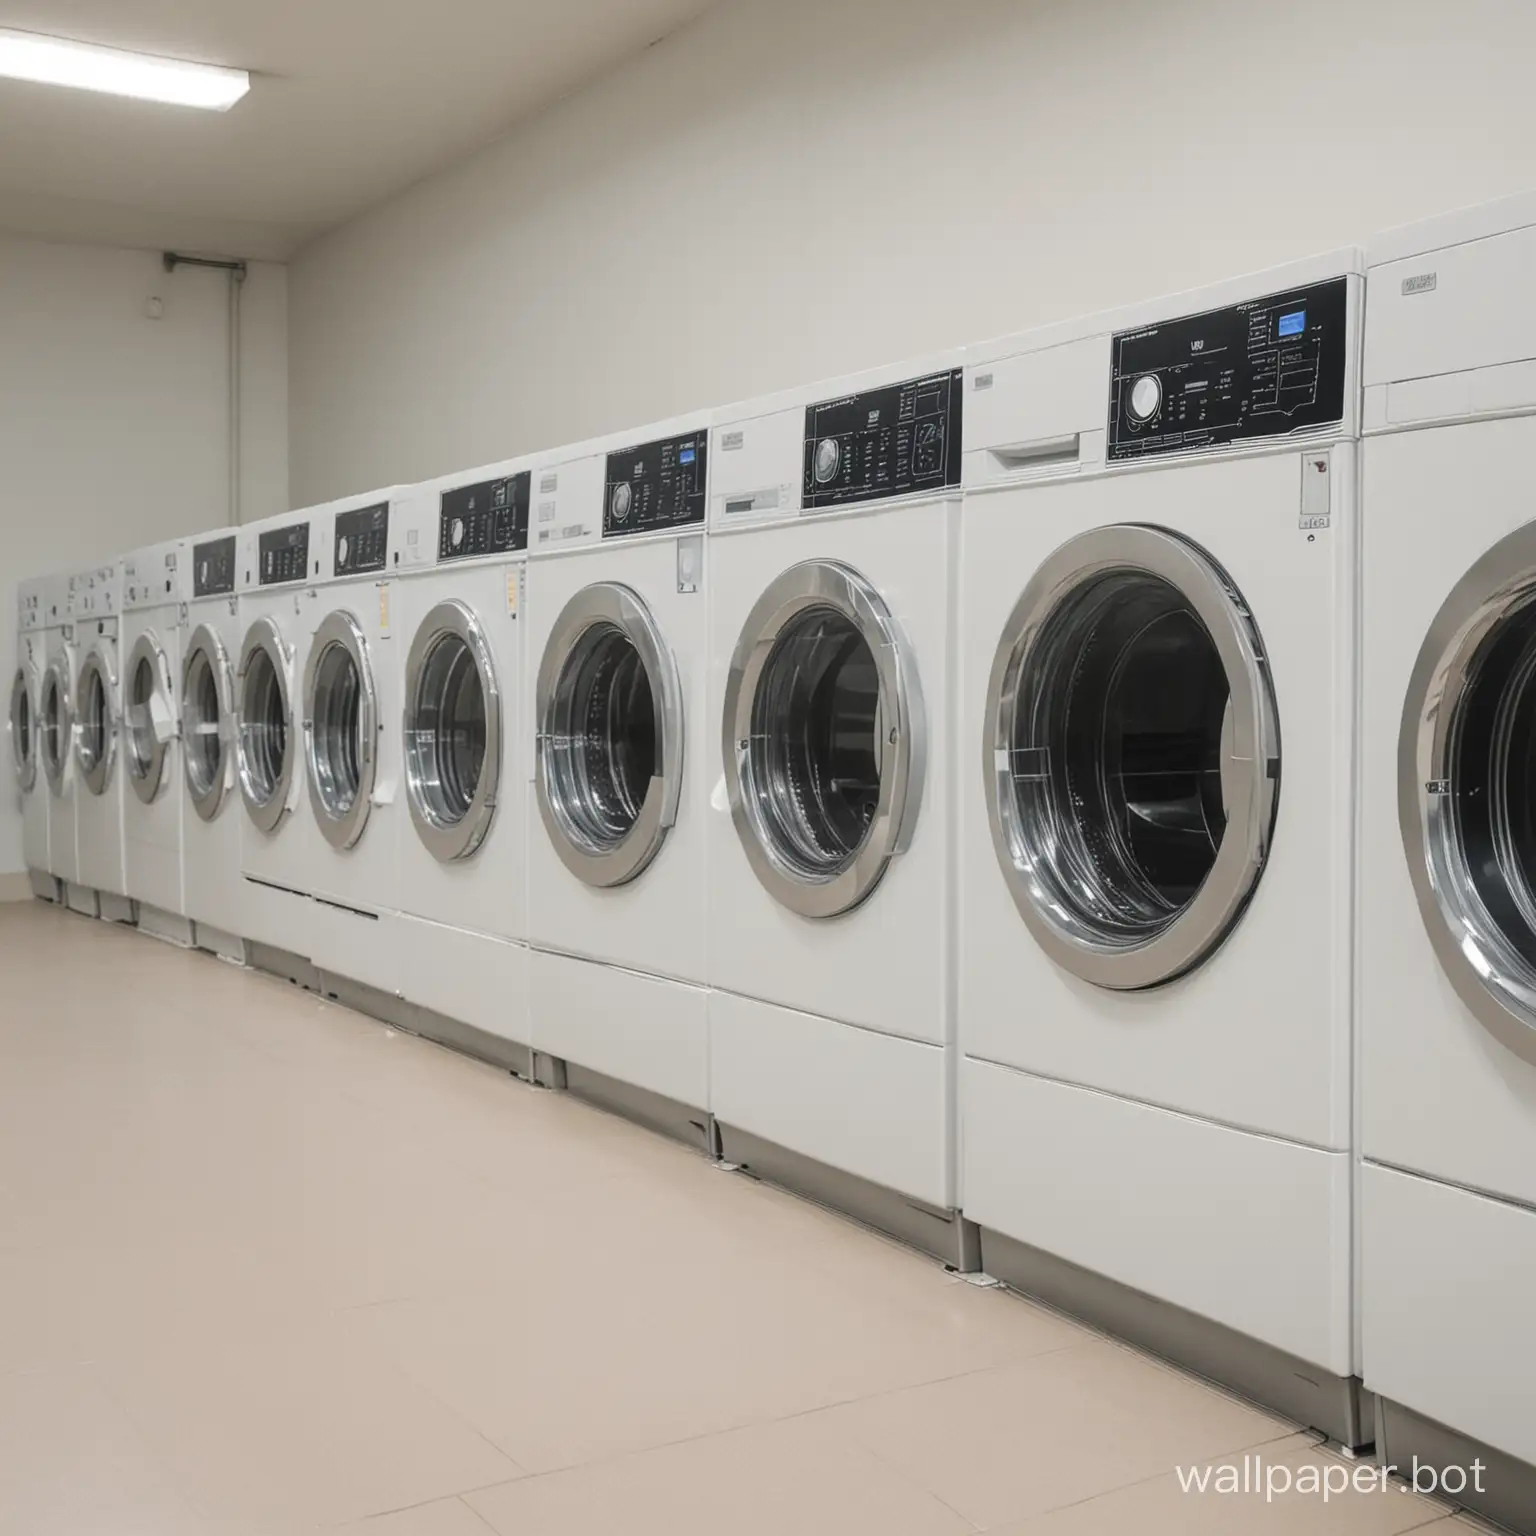 Row-of-Washing-Machines-in-a-Busy-Laundry-Room